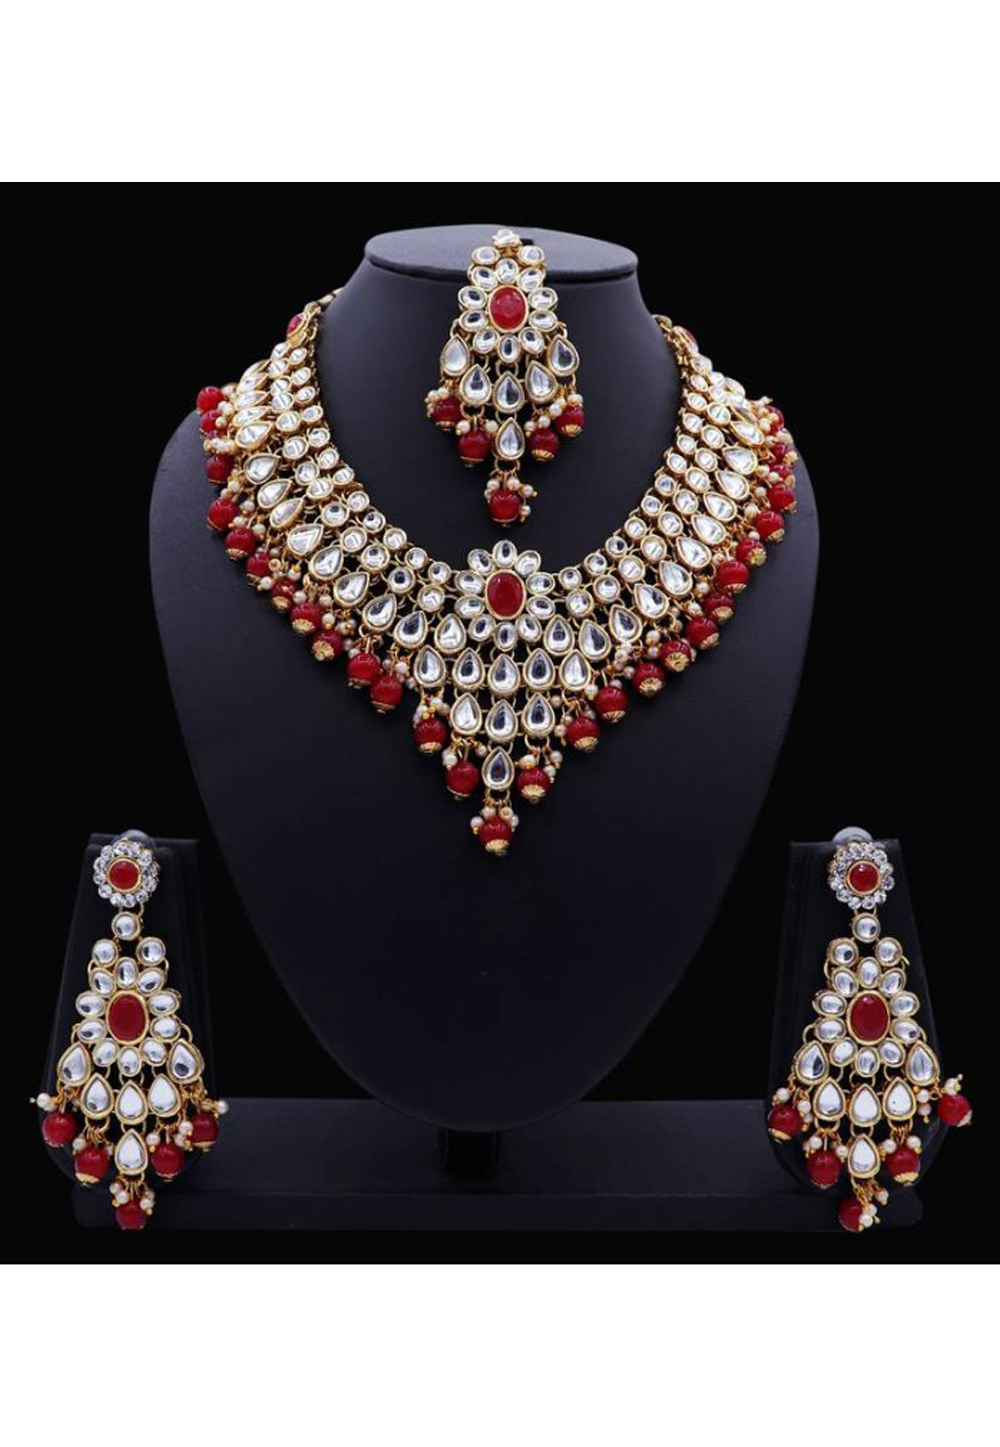 Buy Red Brass Necklace Set (Necklace, Earrings) for INR2499.00 | Biba India